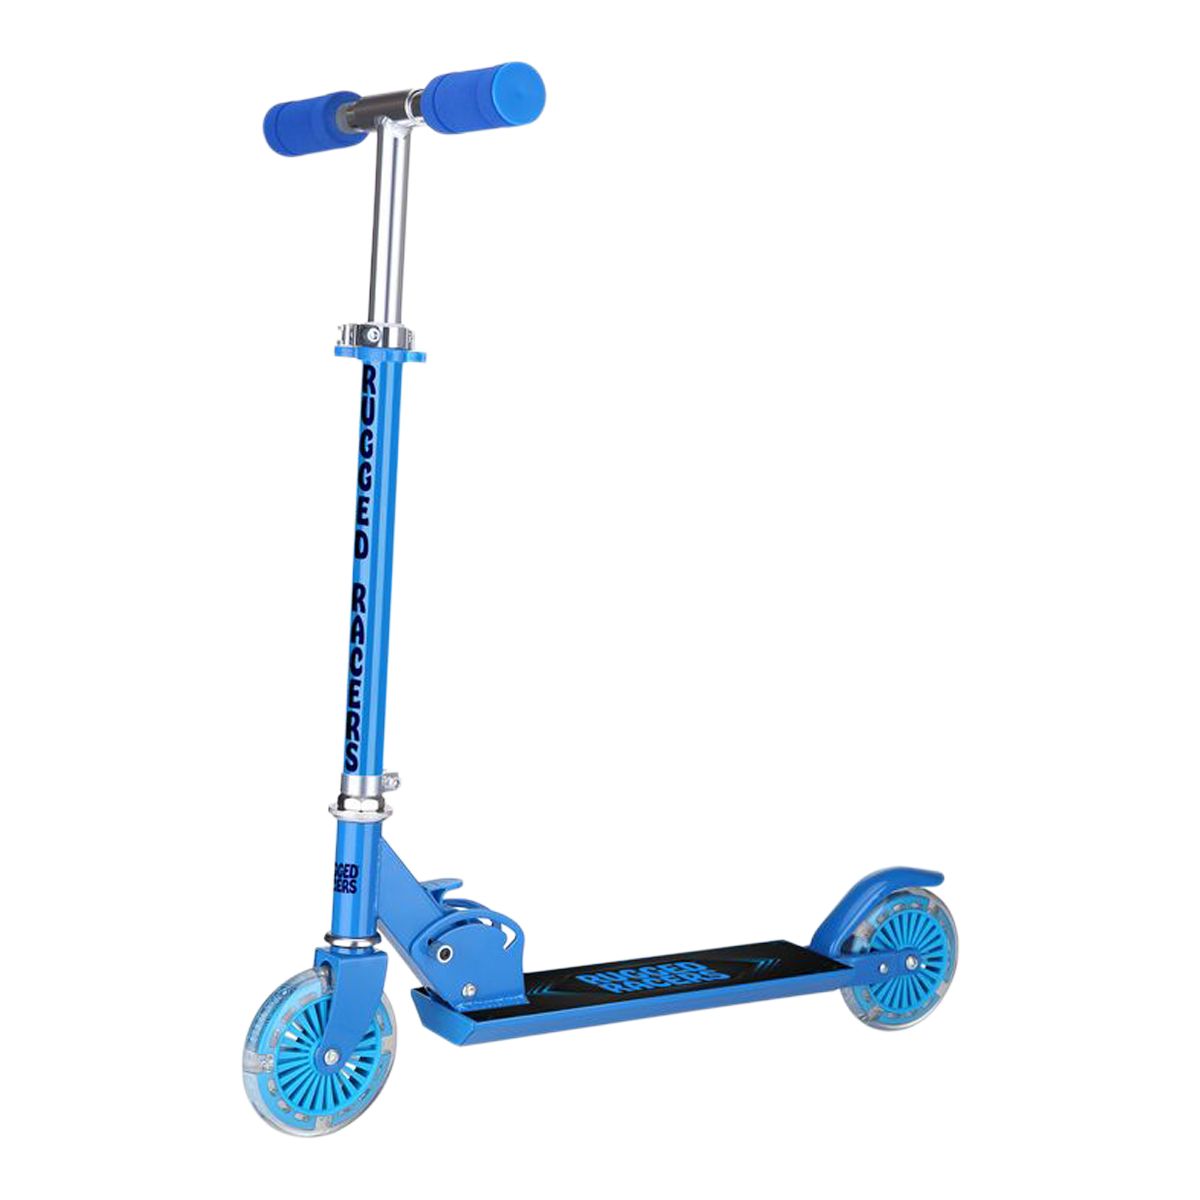 Rugged Racer Foldable Kids' 2 Wheel Scooter